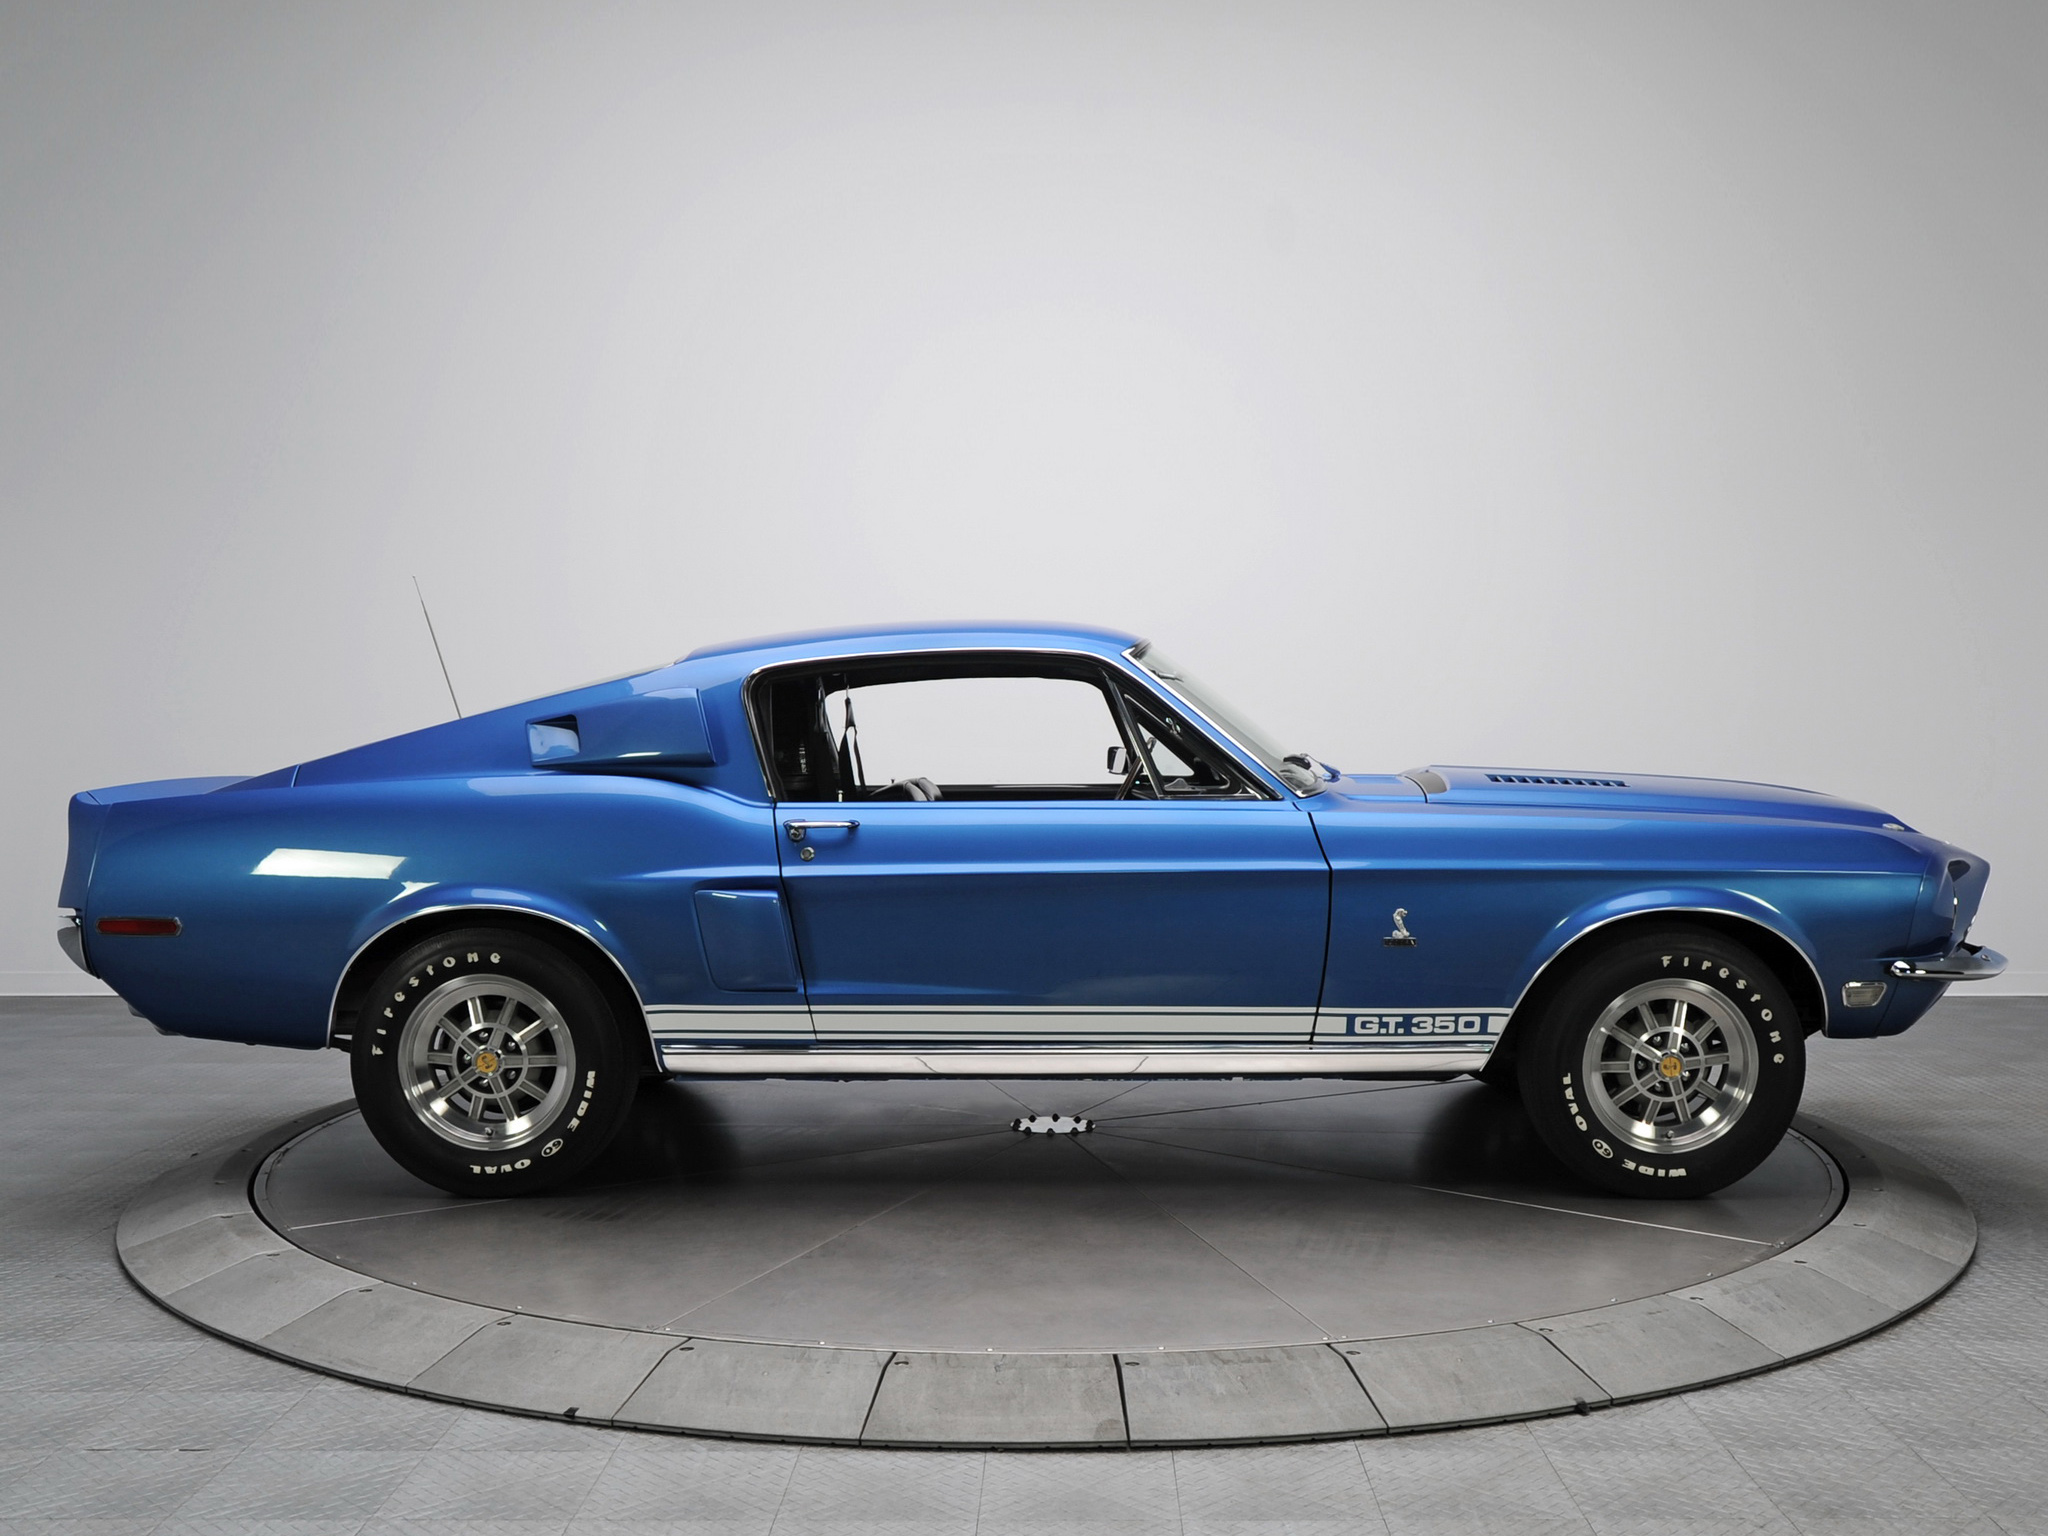 rate select rating give vintage ford mustang 1 5 give vintage ford ...